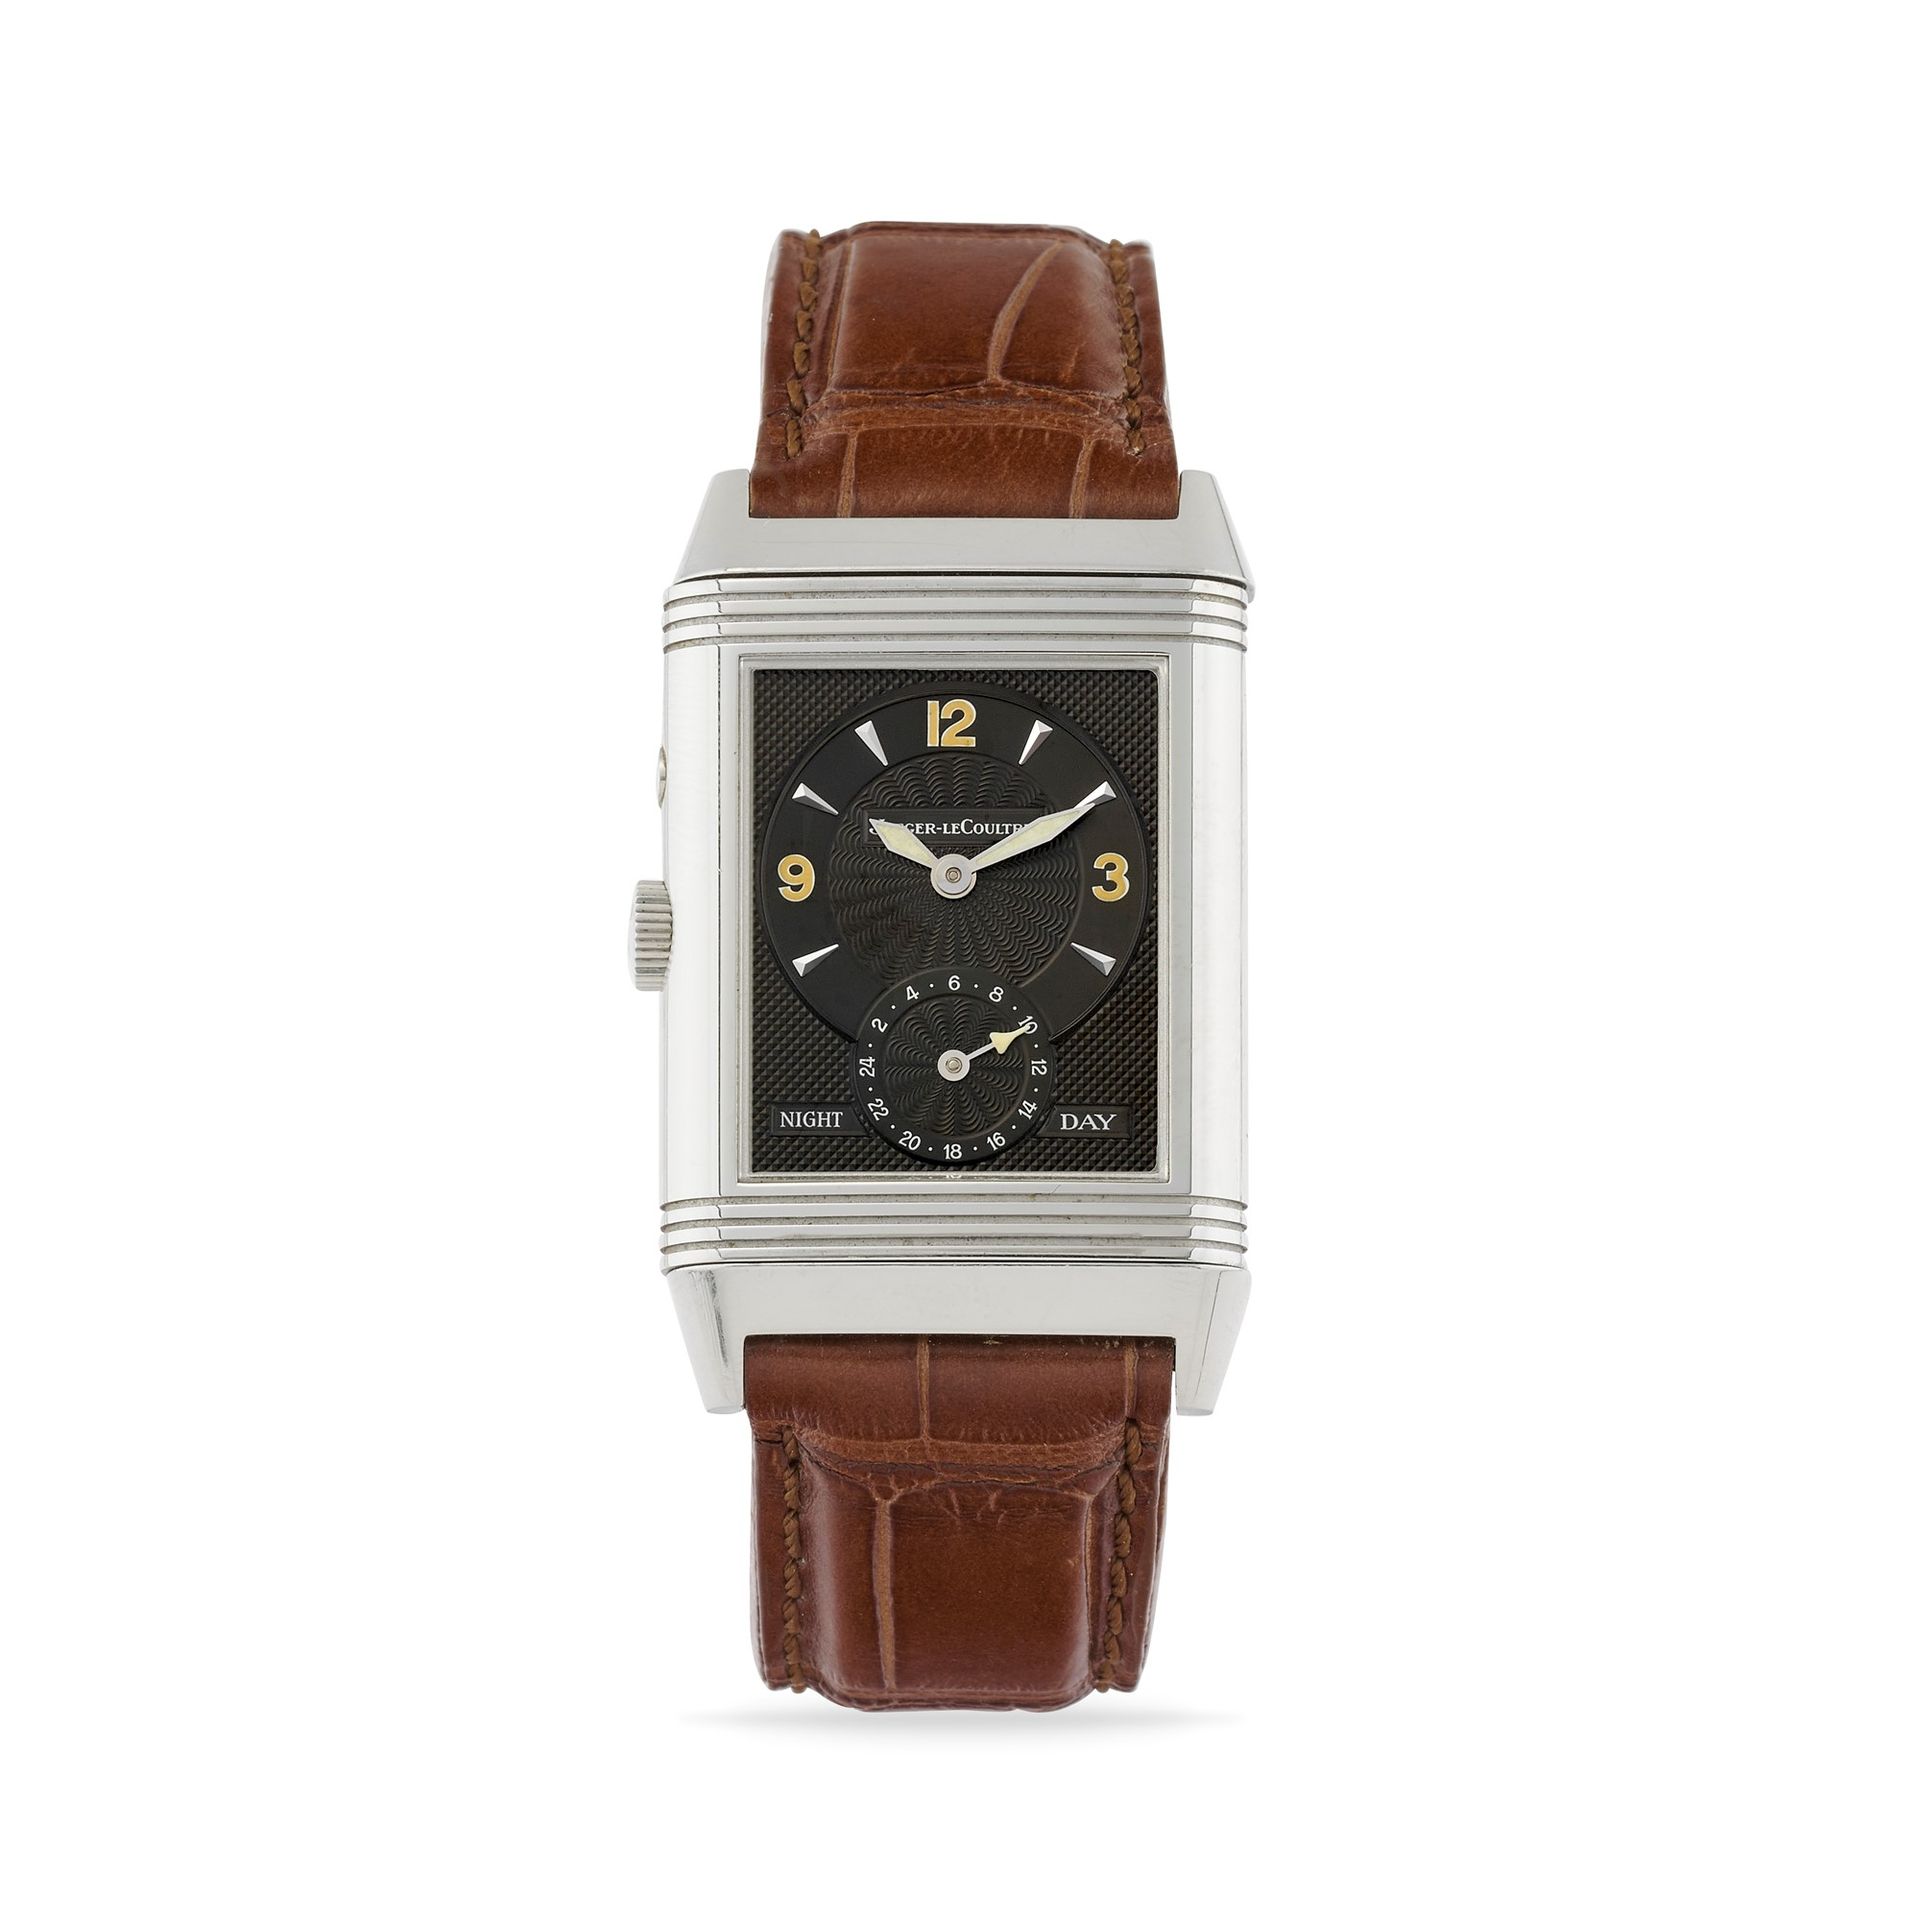 JAEGER-LECOULTRE Jaeger-LeCoultre Reverso Duoface Night & Day 270854, '90年代


不锈&hellip;